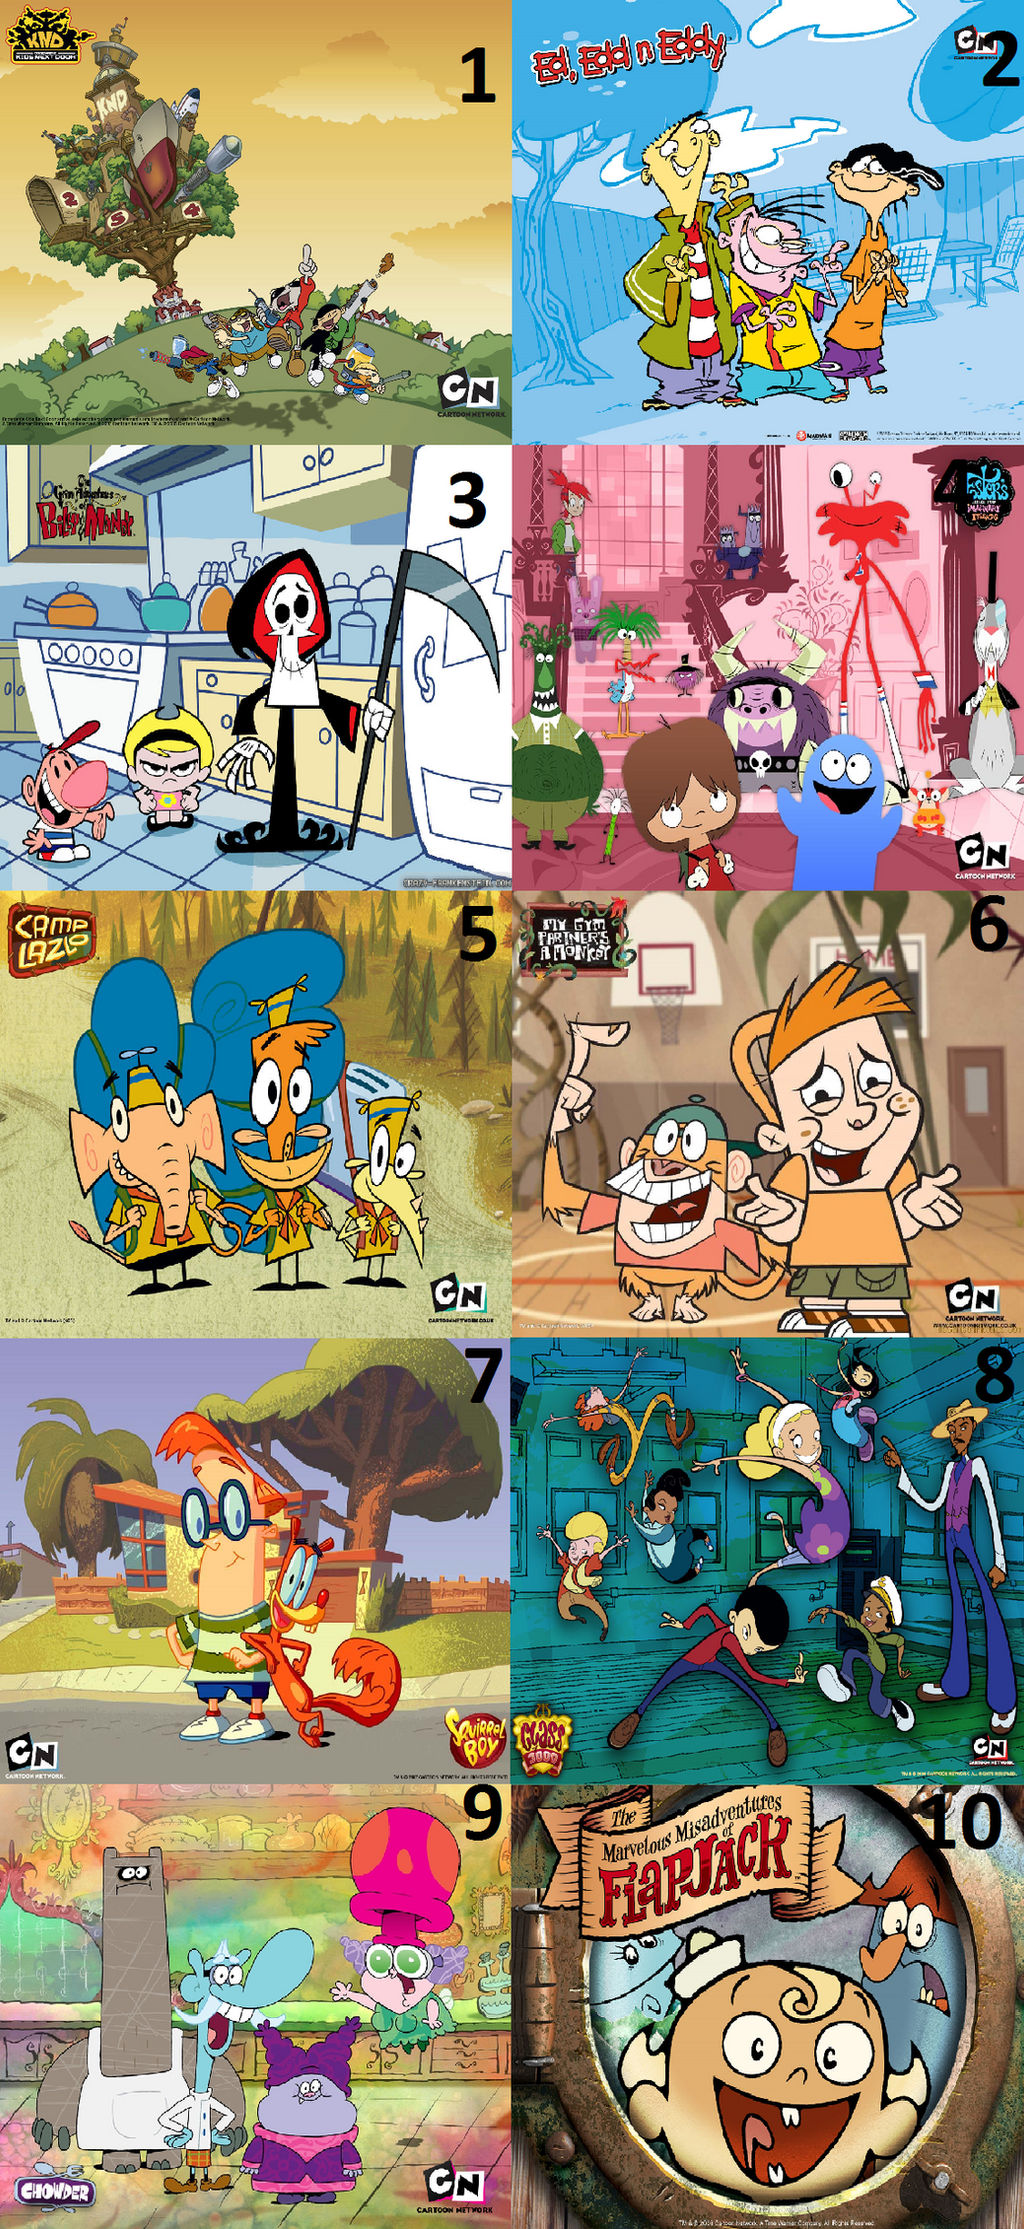 My Top 10 Favorite Old Cartoon Network Shows by dlee1293847 on DeviantArt